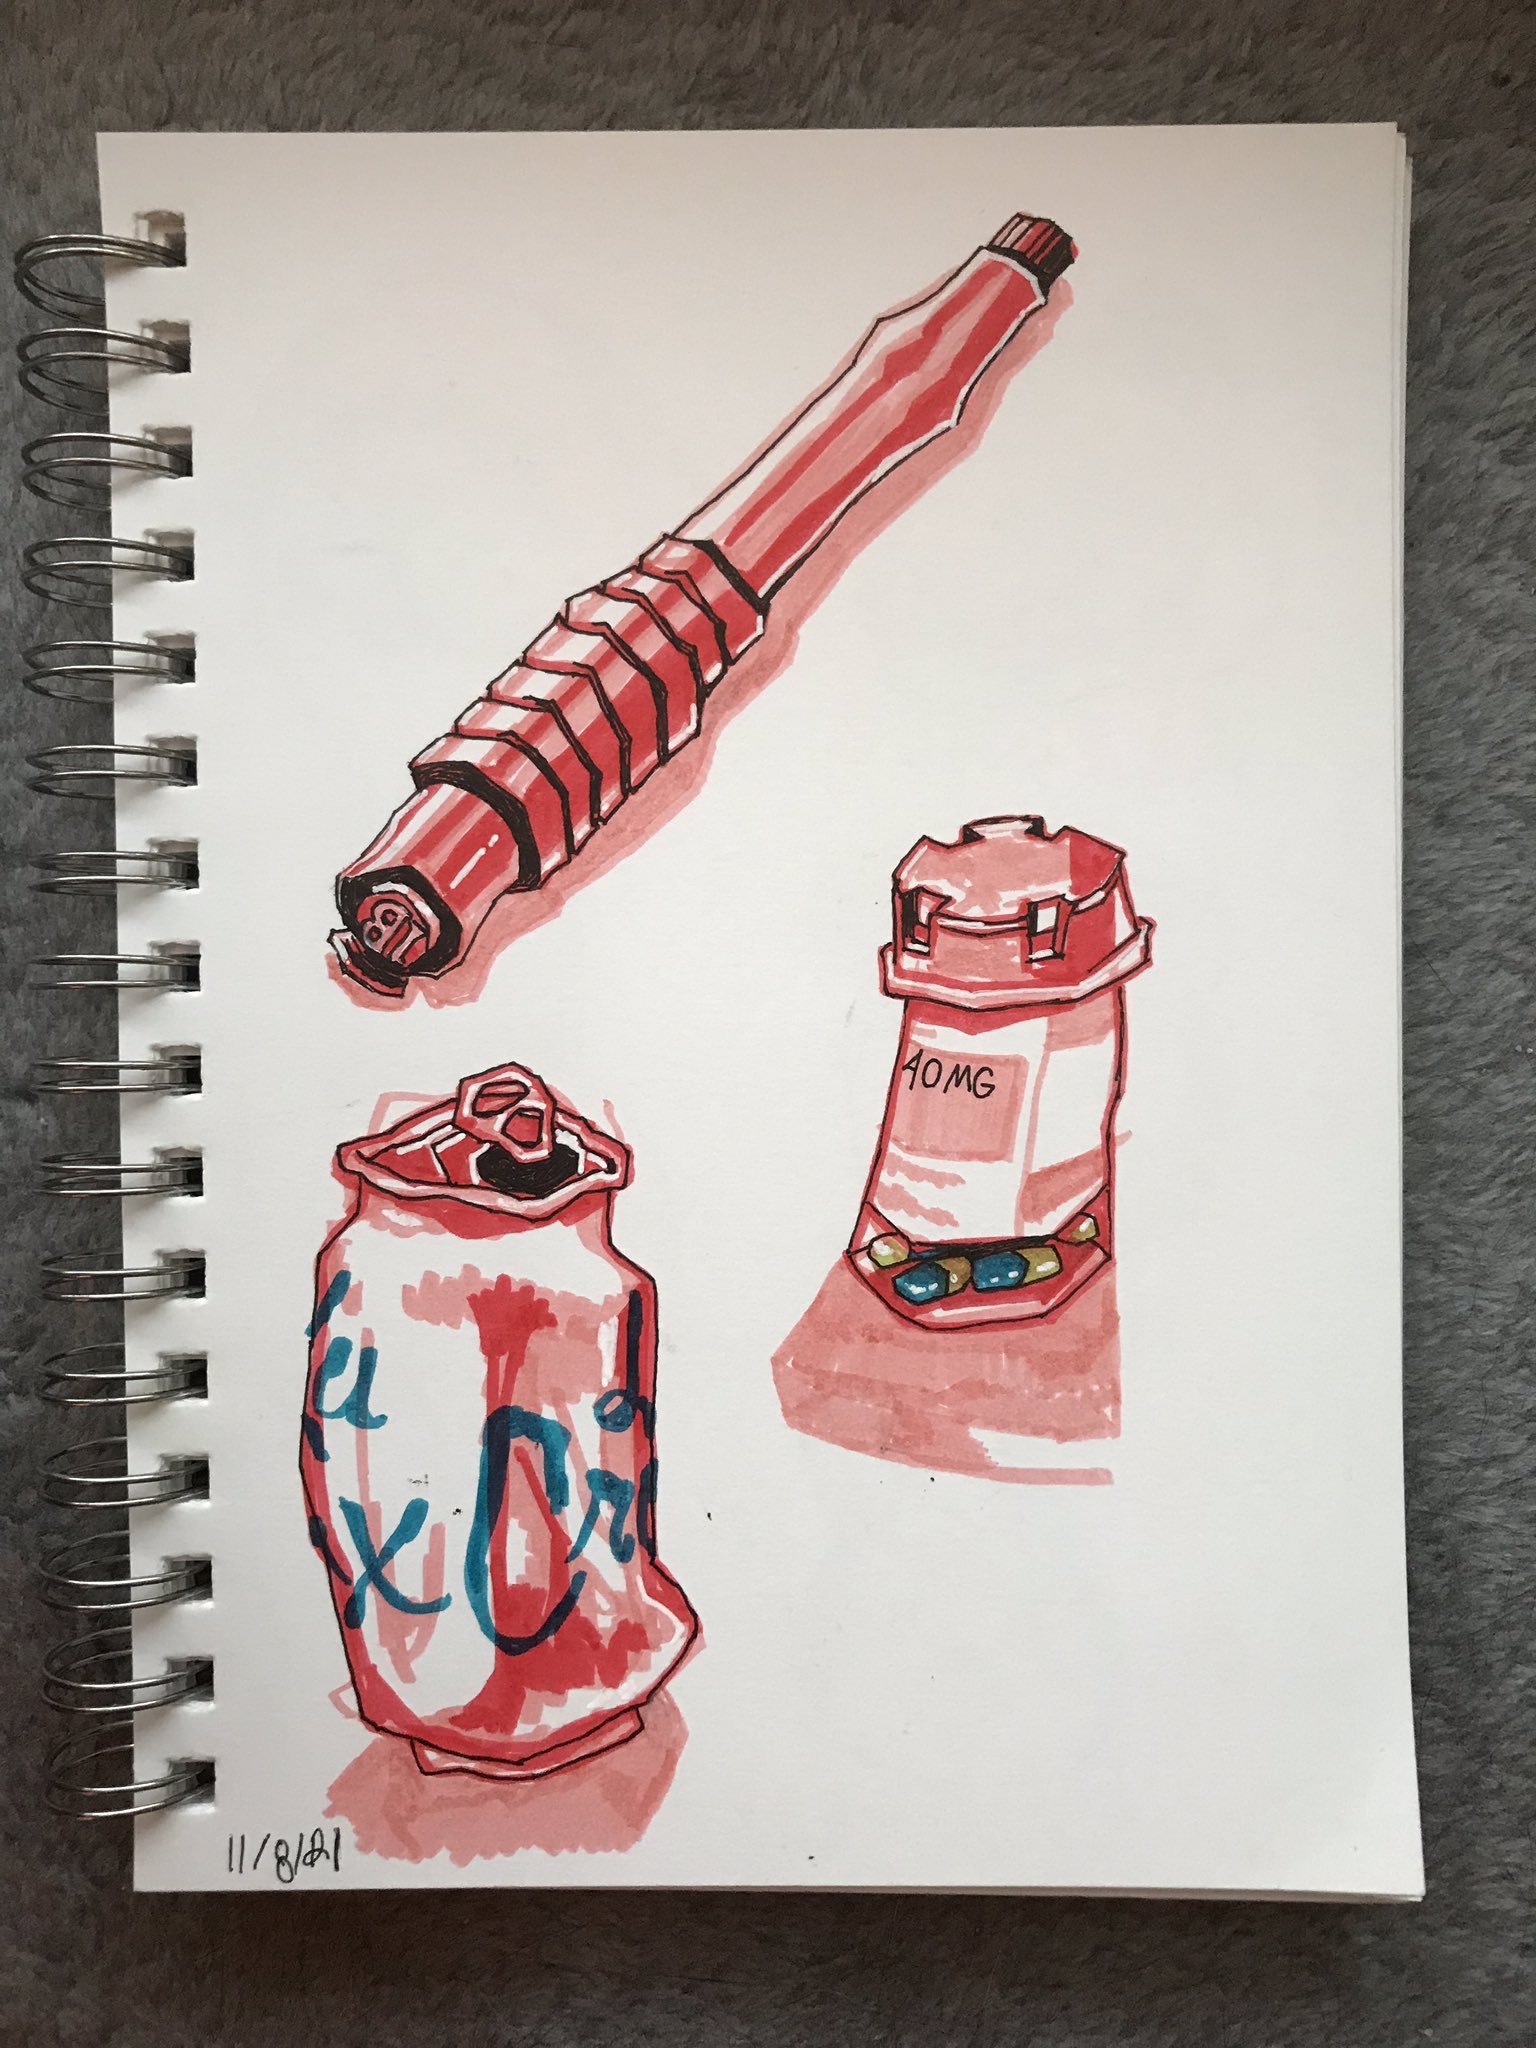 Photo of a sketchbook page showing marker drawings of a pill bottle, La Croix can, and marker